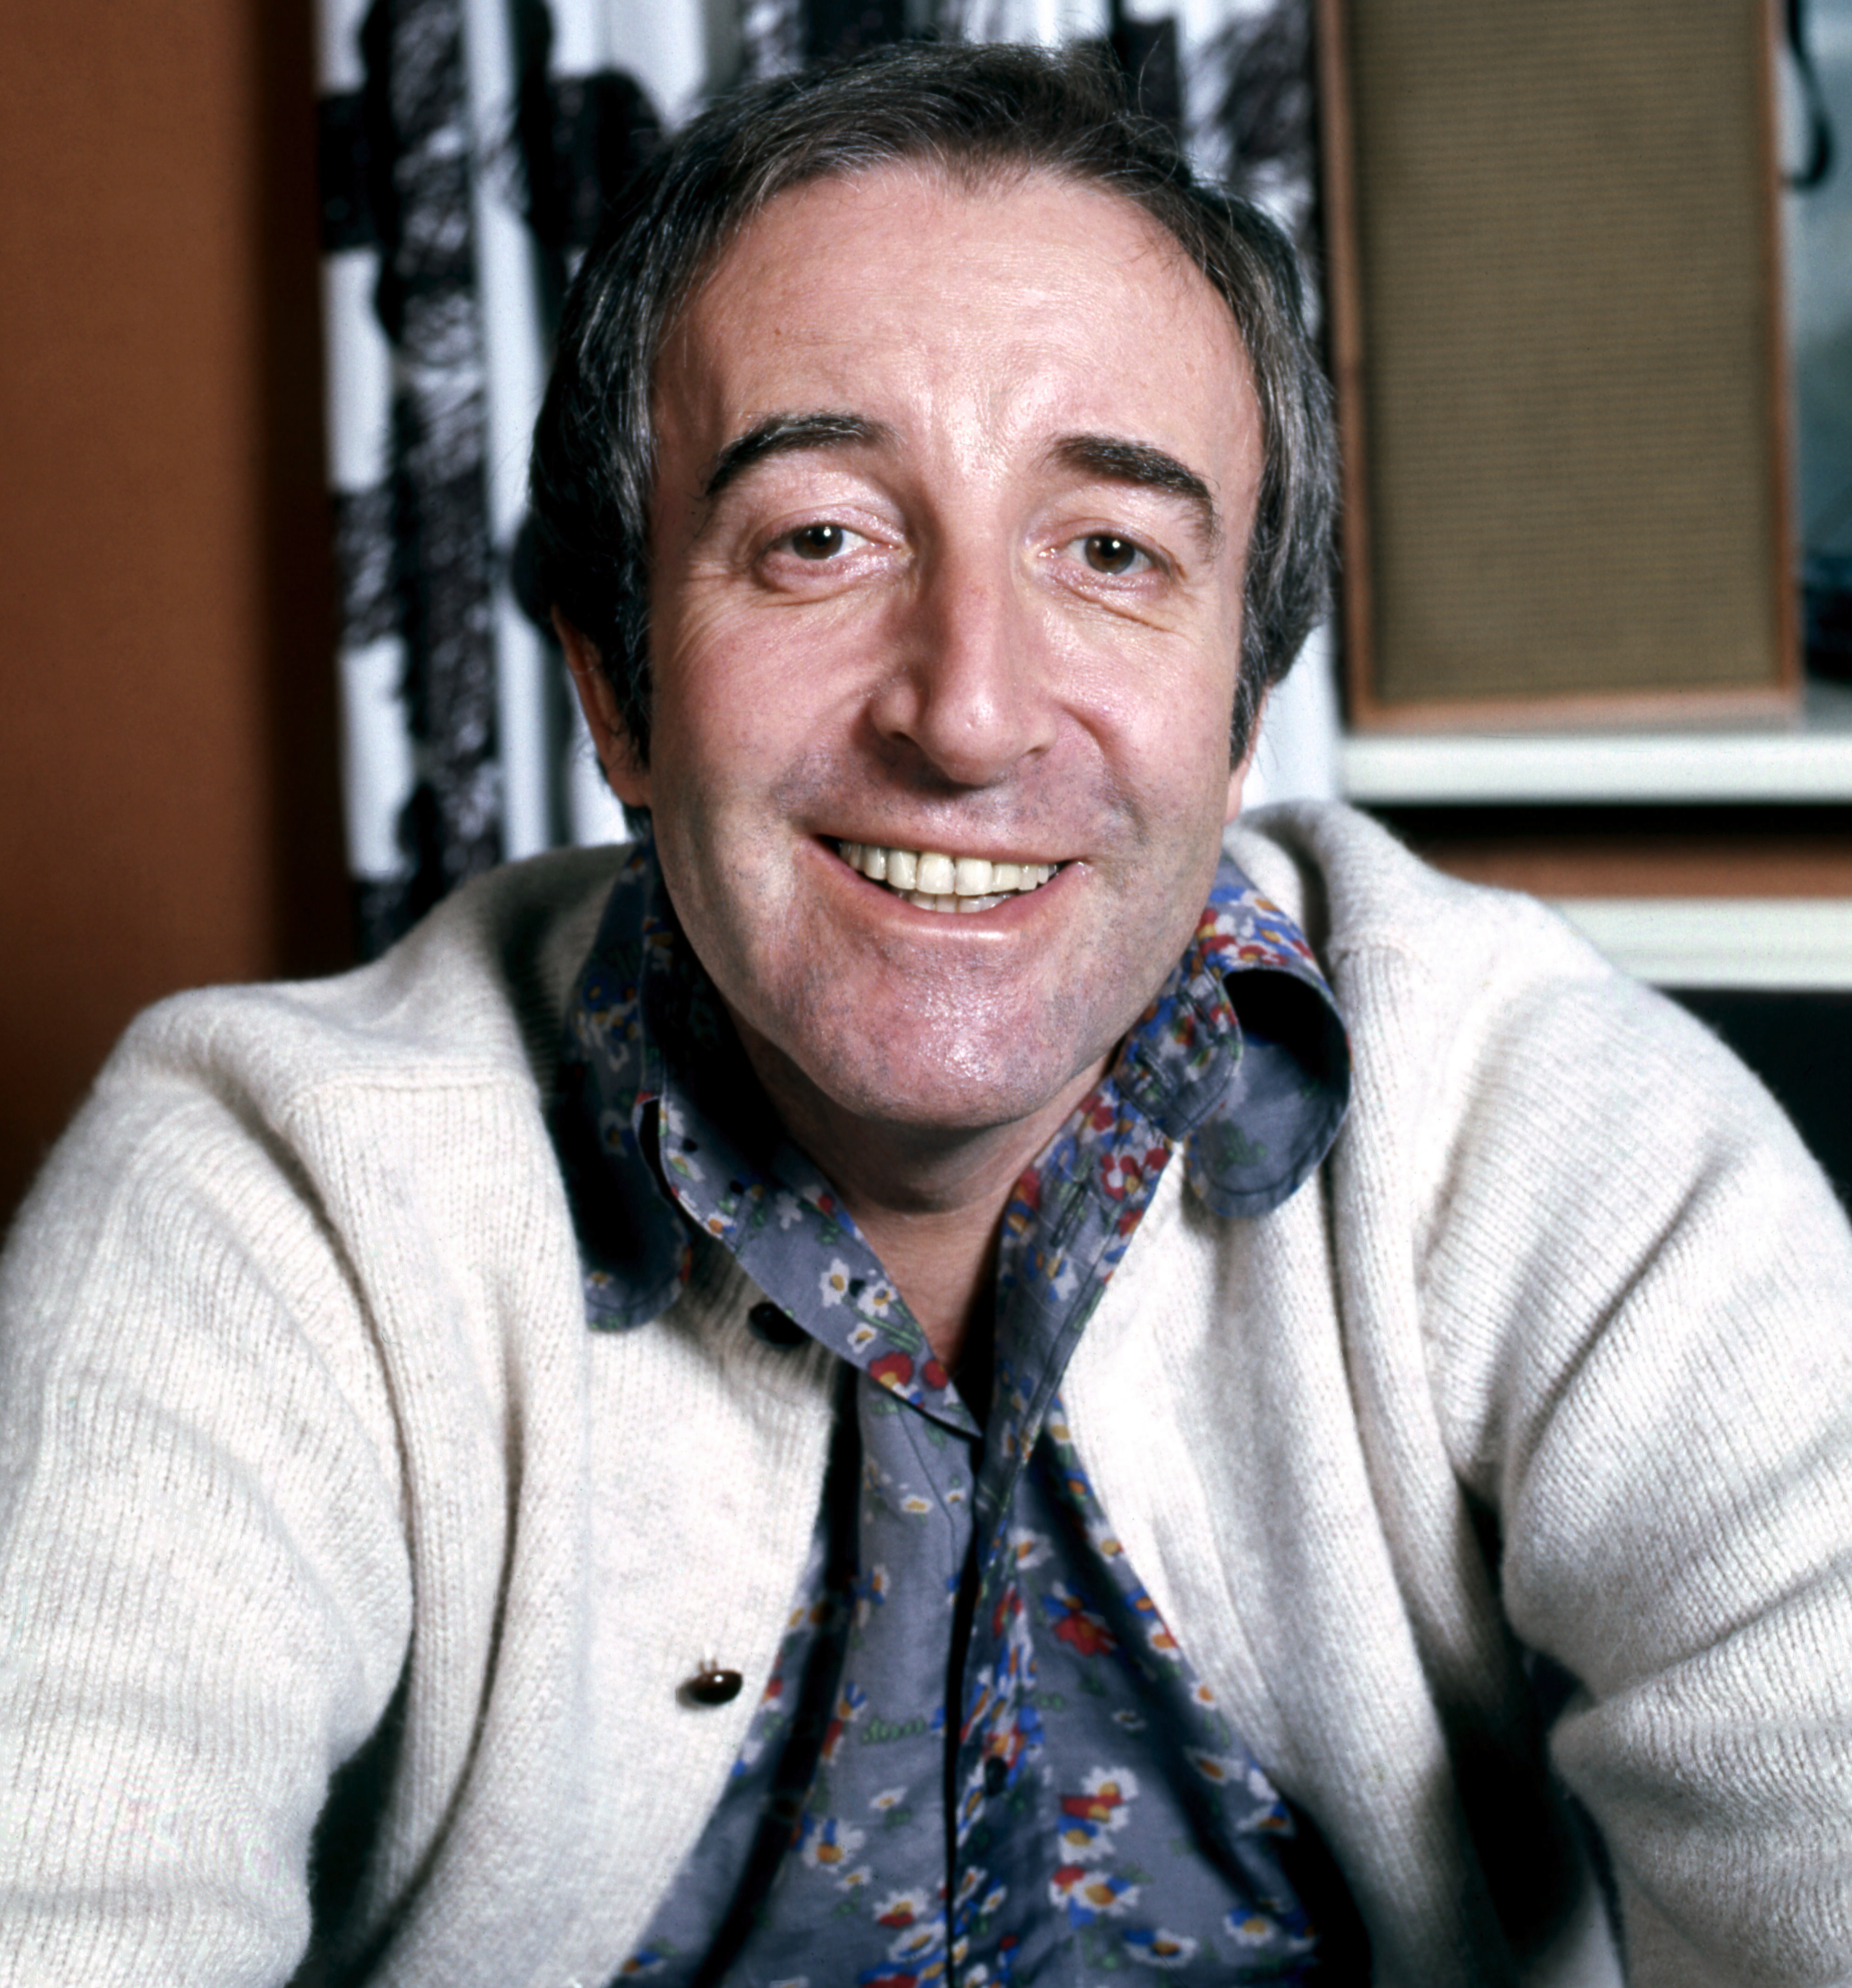 Picture of Peter Sellers